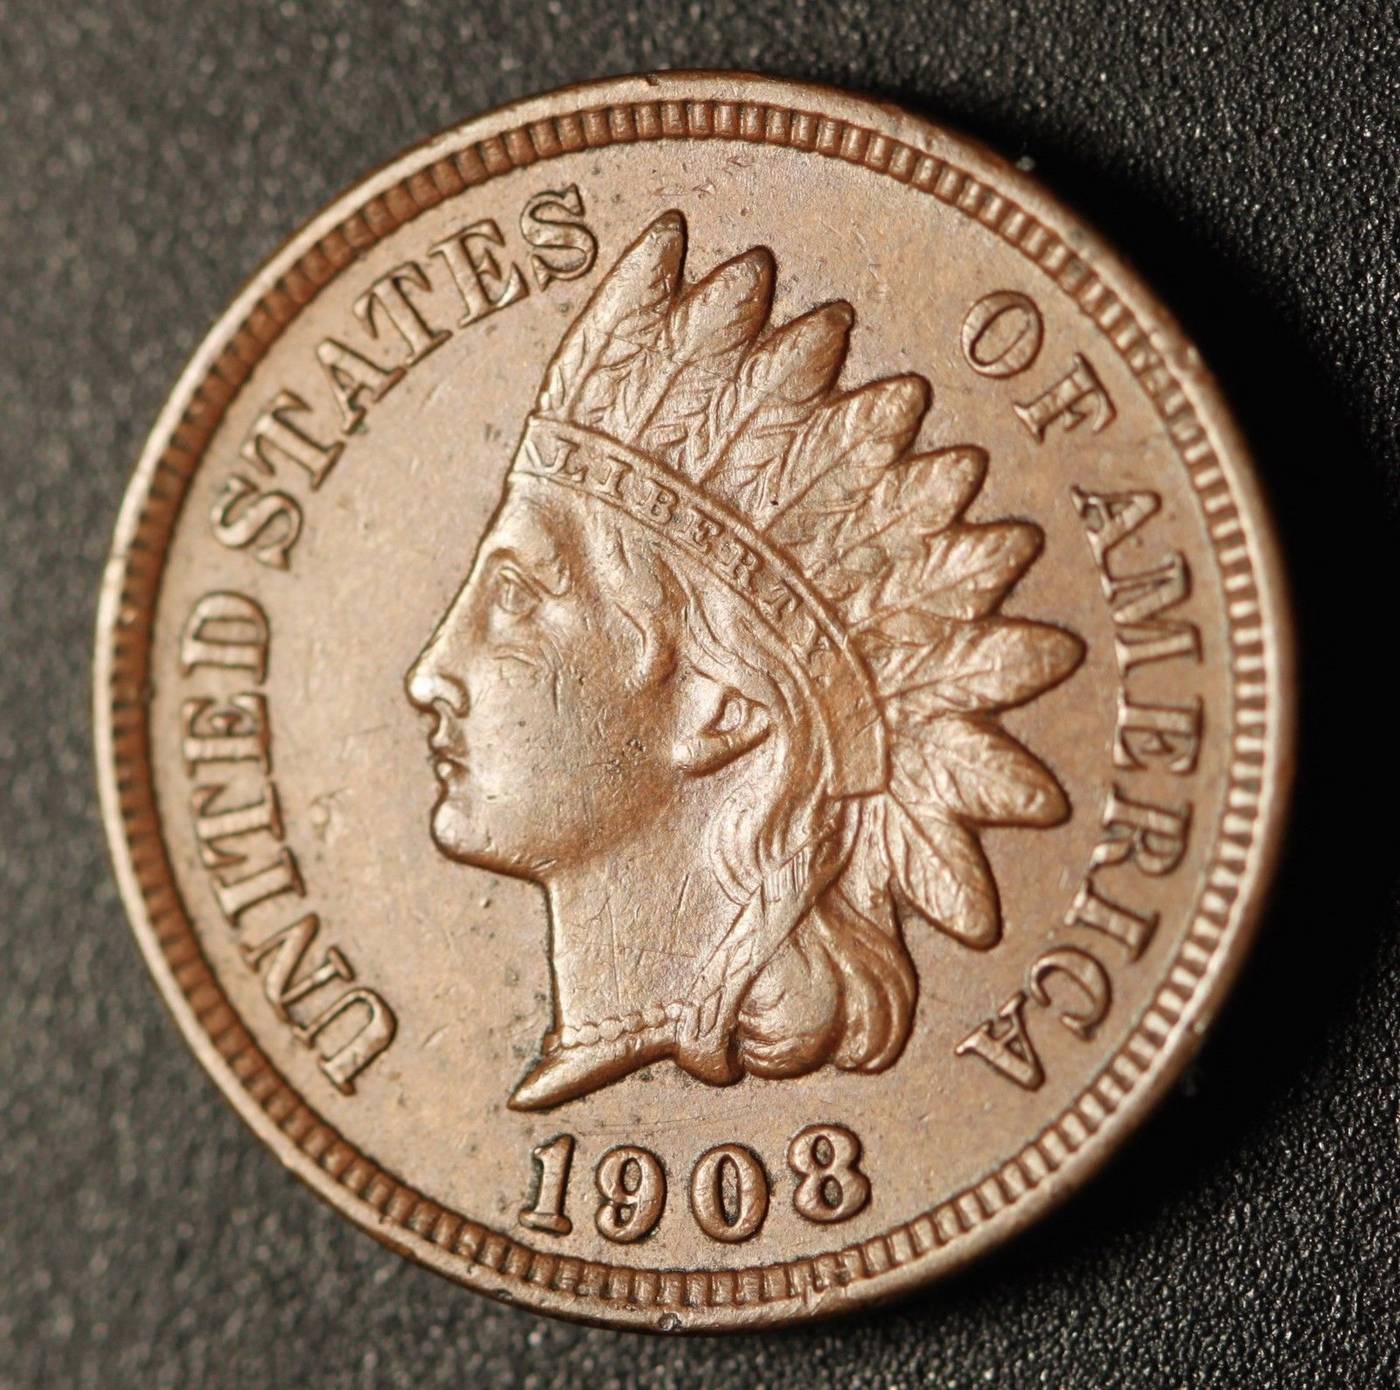 1908 RPD-017 - Indian Head Penny - Photo by Ed Nathanson